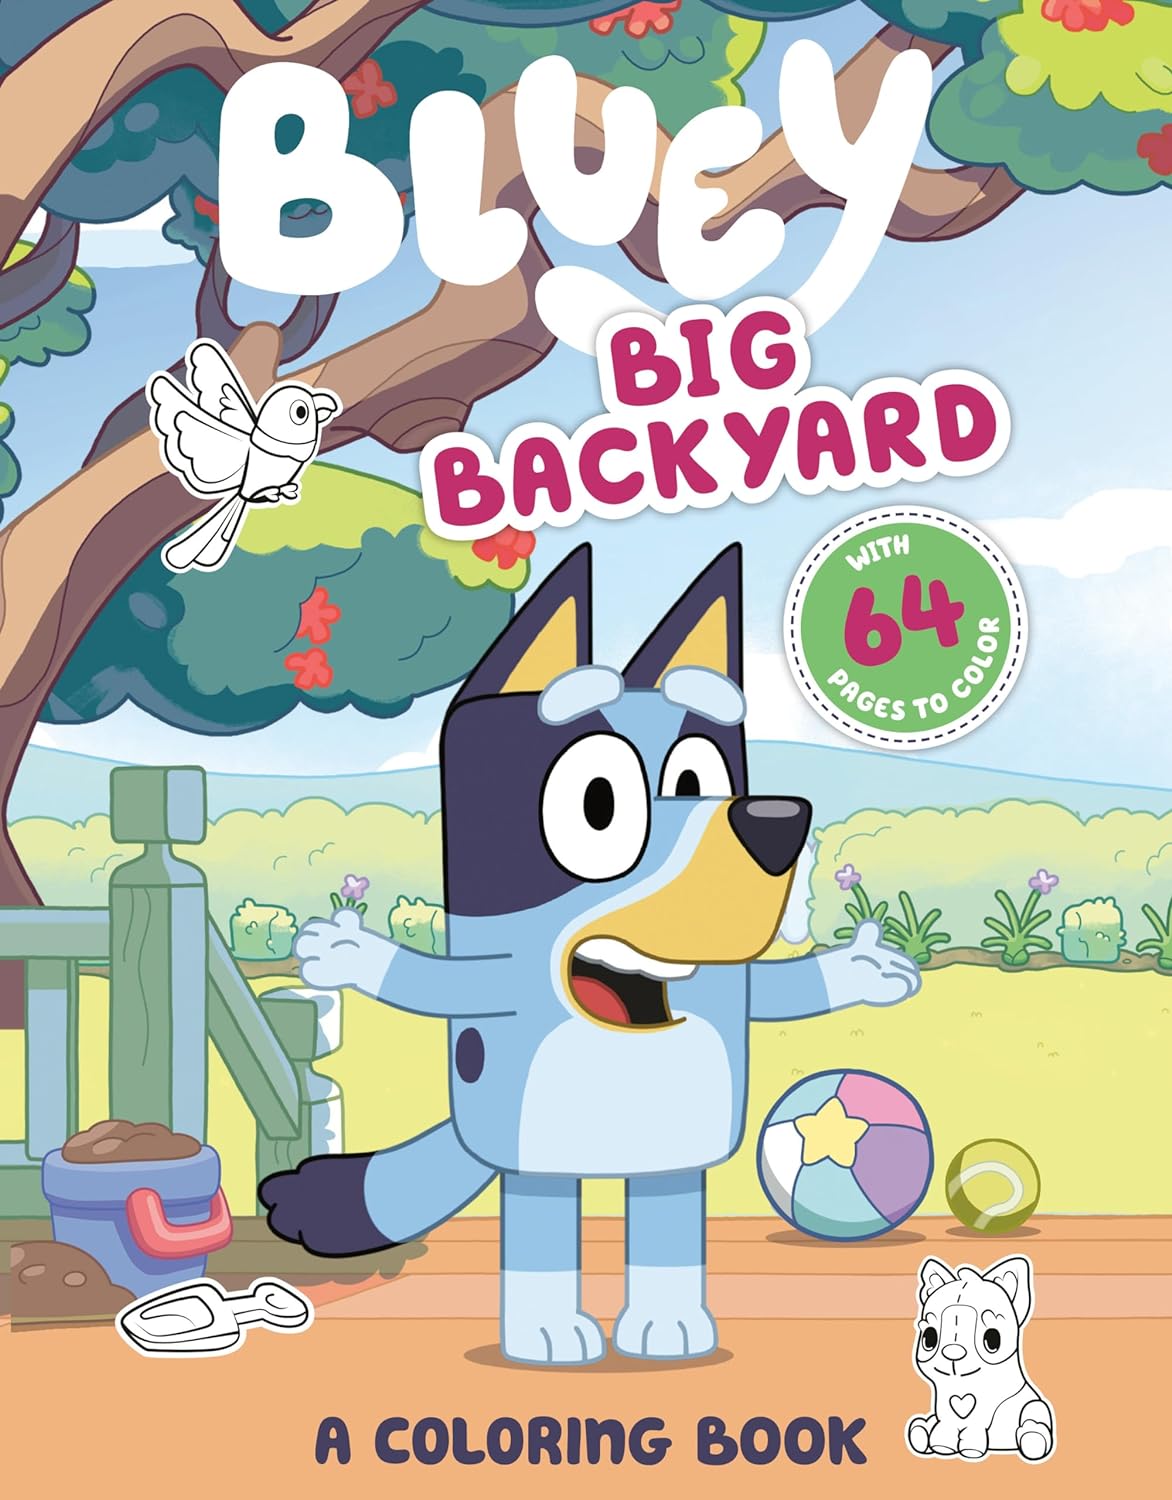 Bluey Big Backyard: A Coloring Book $3.50 + Free Shipping w/ Prime or on $35+